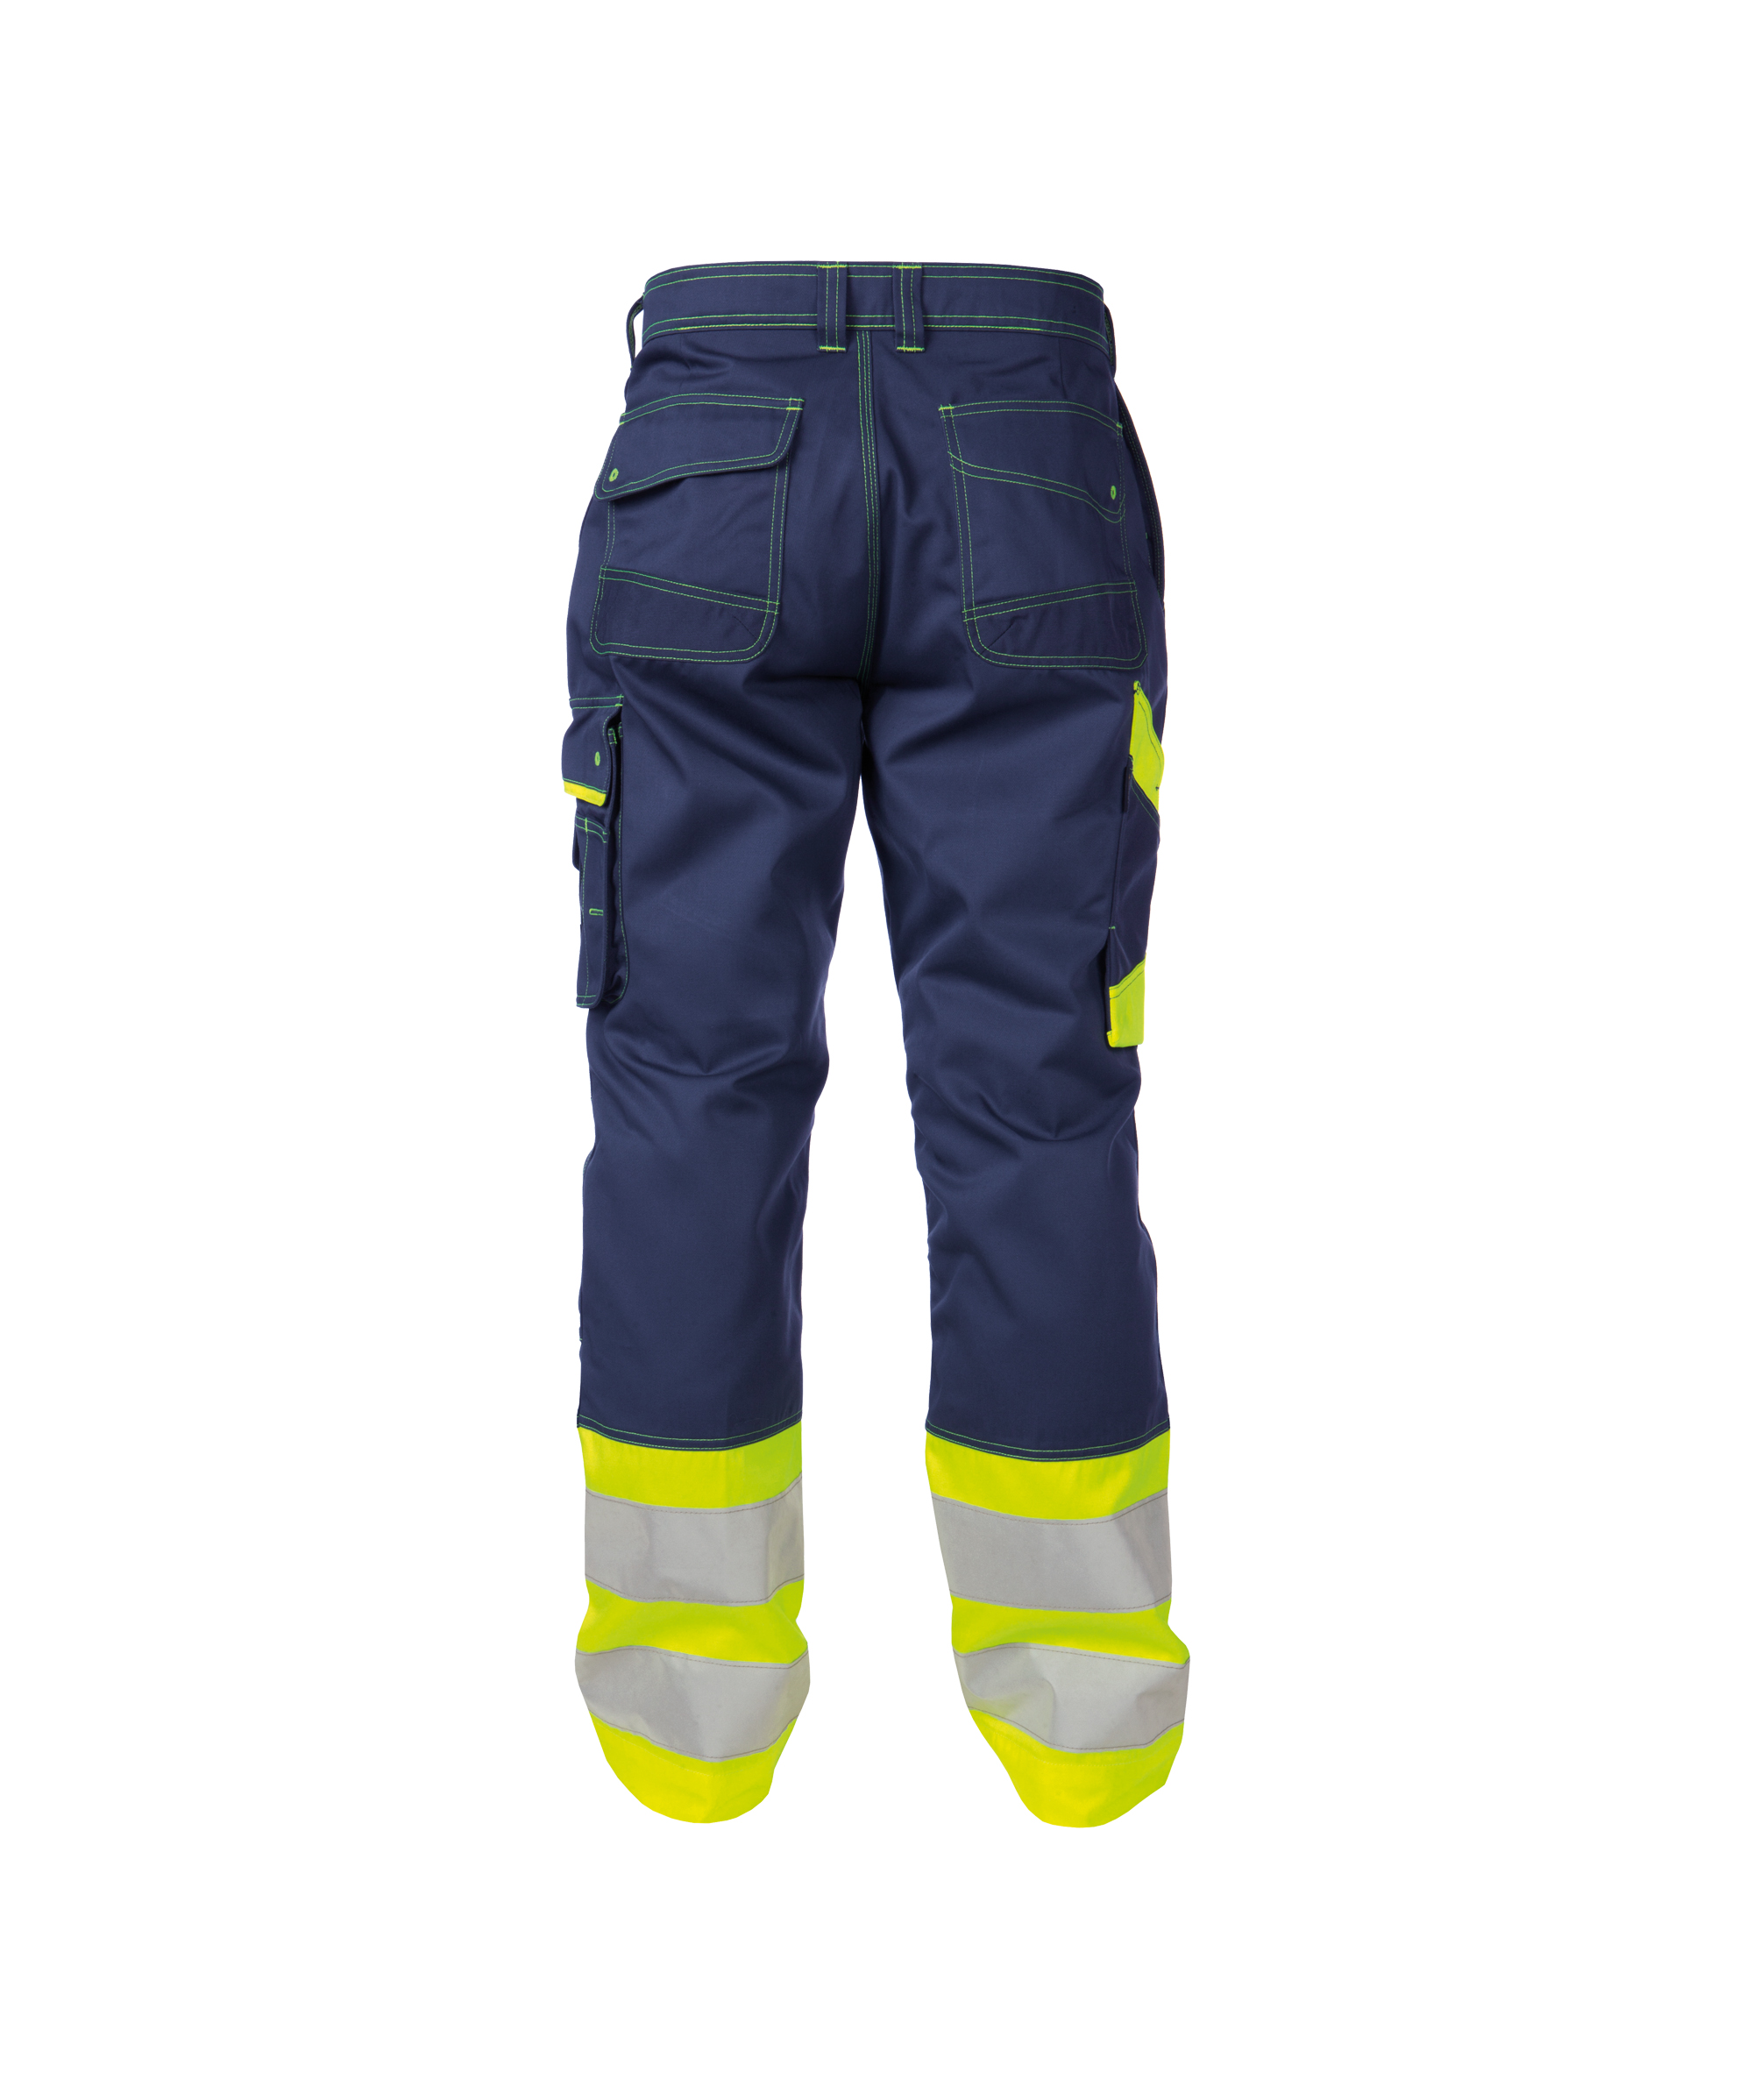 phoenix_high-visibility-work-trousers_navy-fluo-yellow_back.jpg